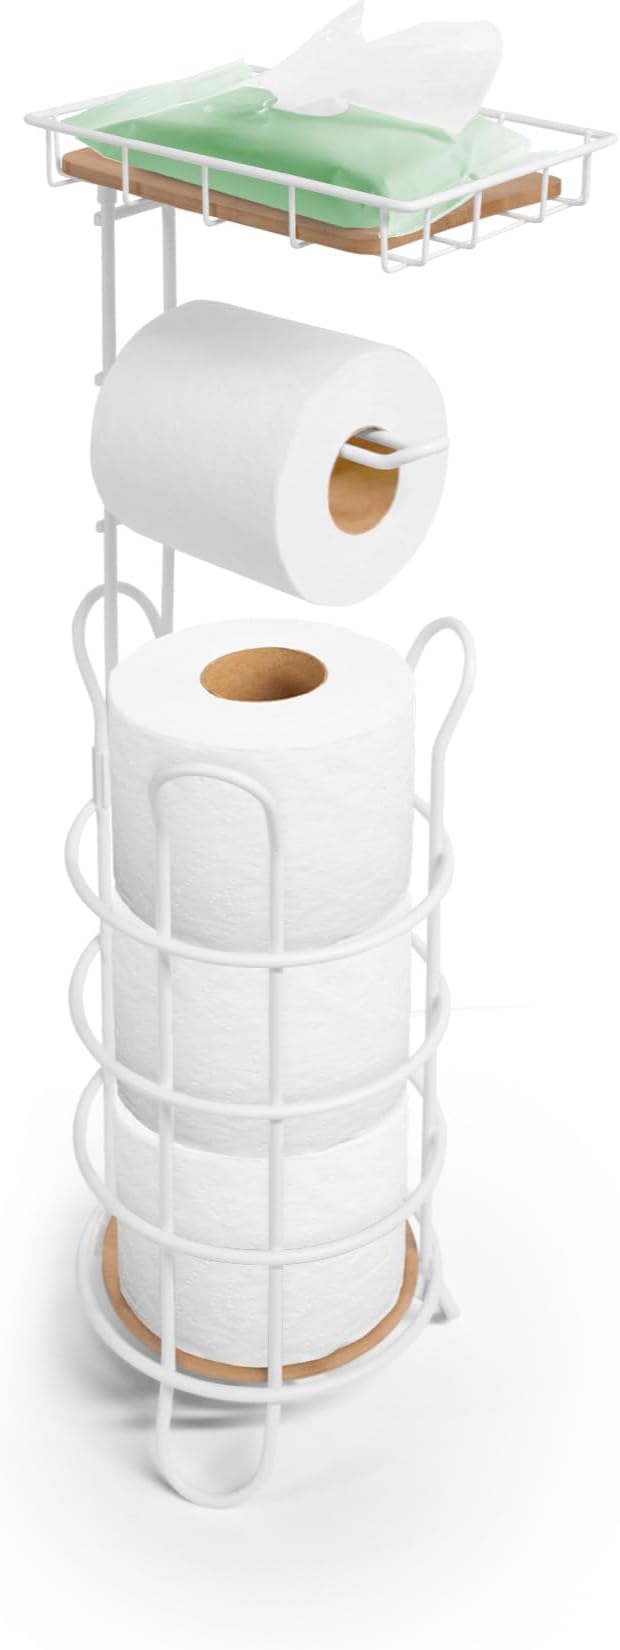 Inspired Living Toilet Paper Holder Stand with Phone or Wipes Bamboo Shelf, Durable Free Standing Toilet Tissue Roll Storage Rack for Bathroom, Reserve Holds 3 Mega Rolls, White